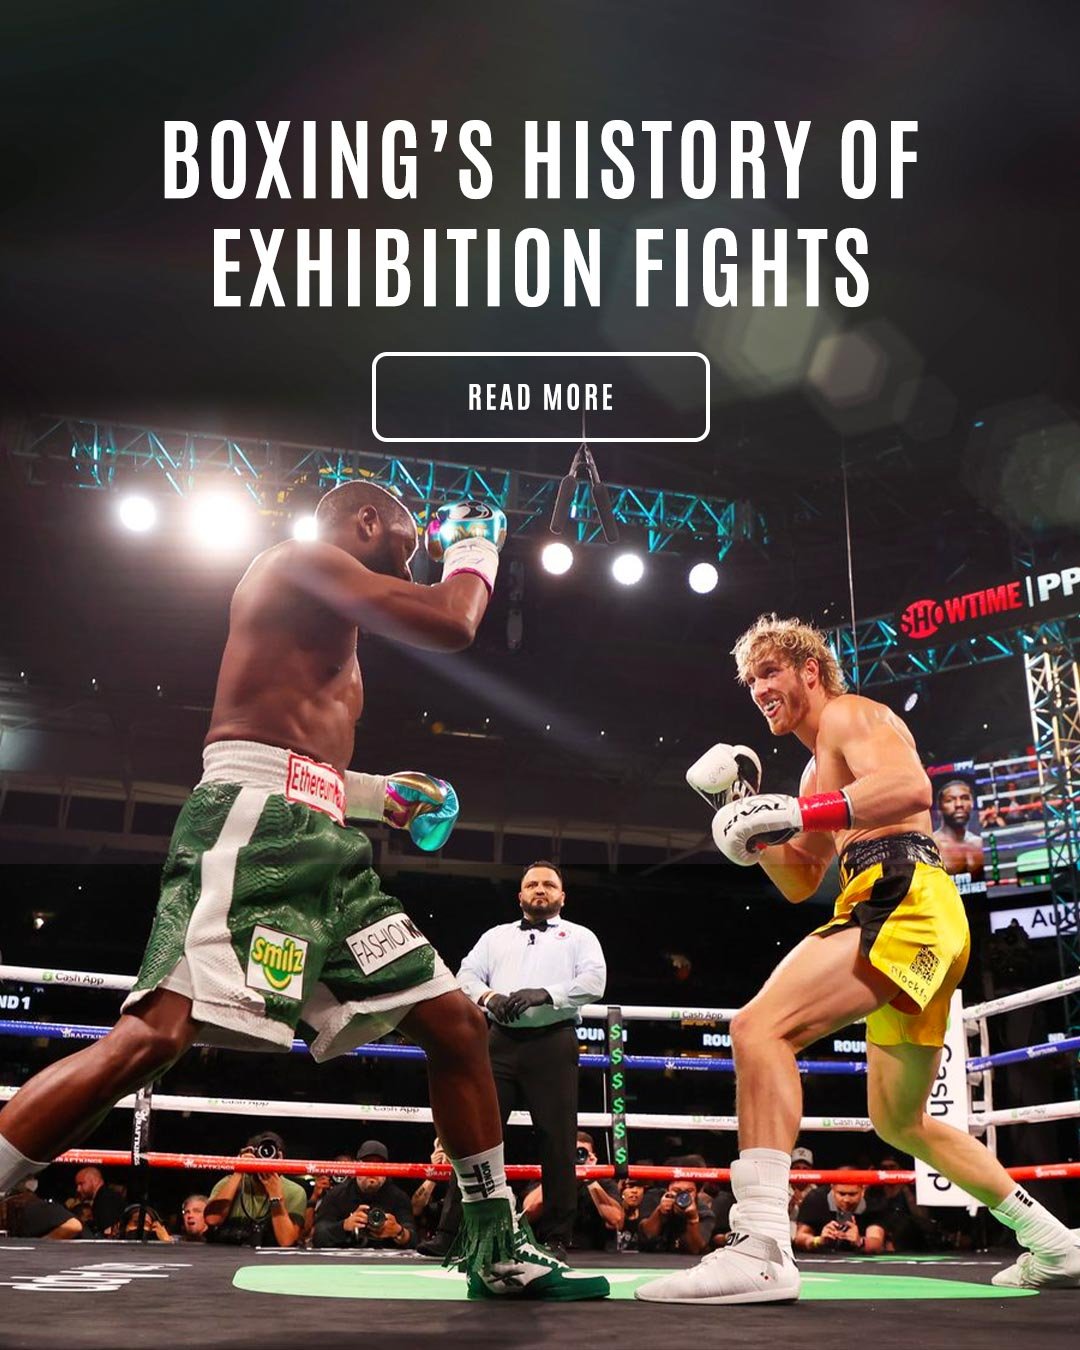 History of Exhibition Fights